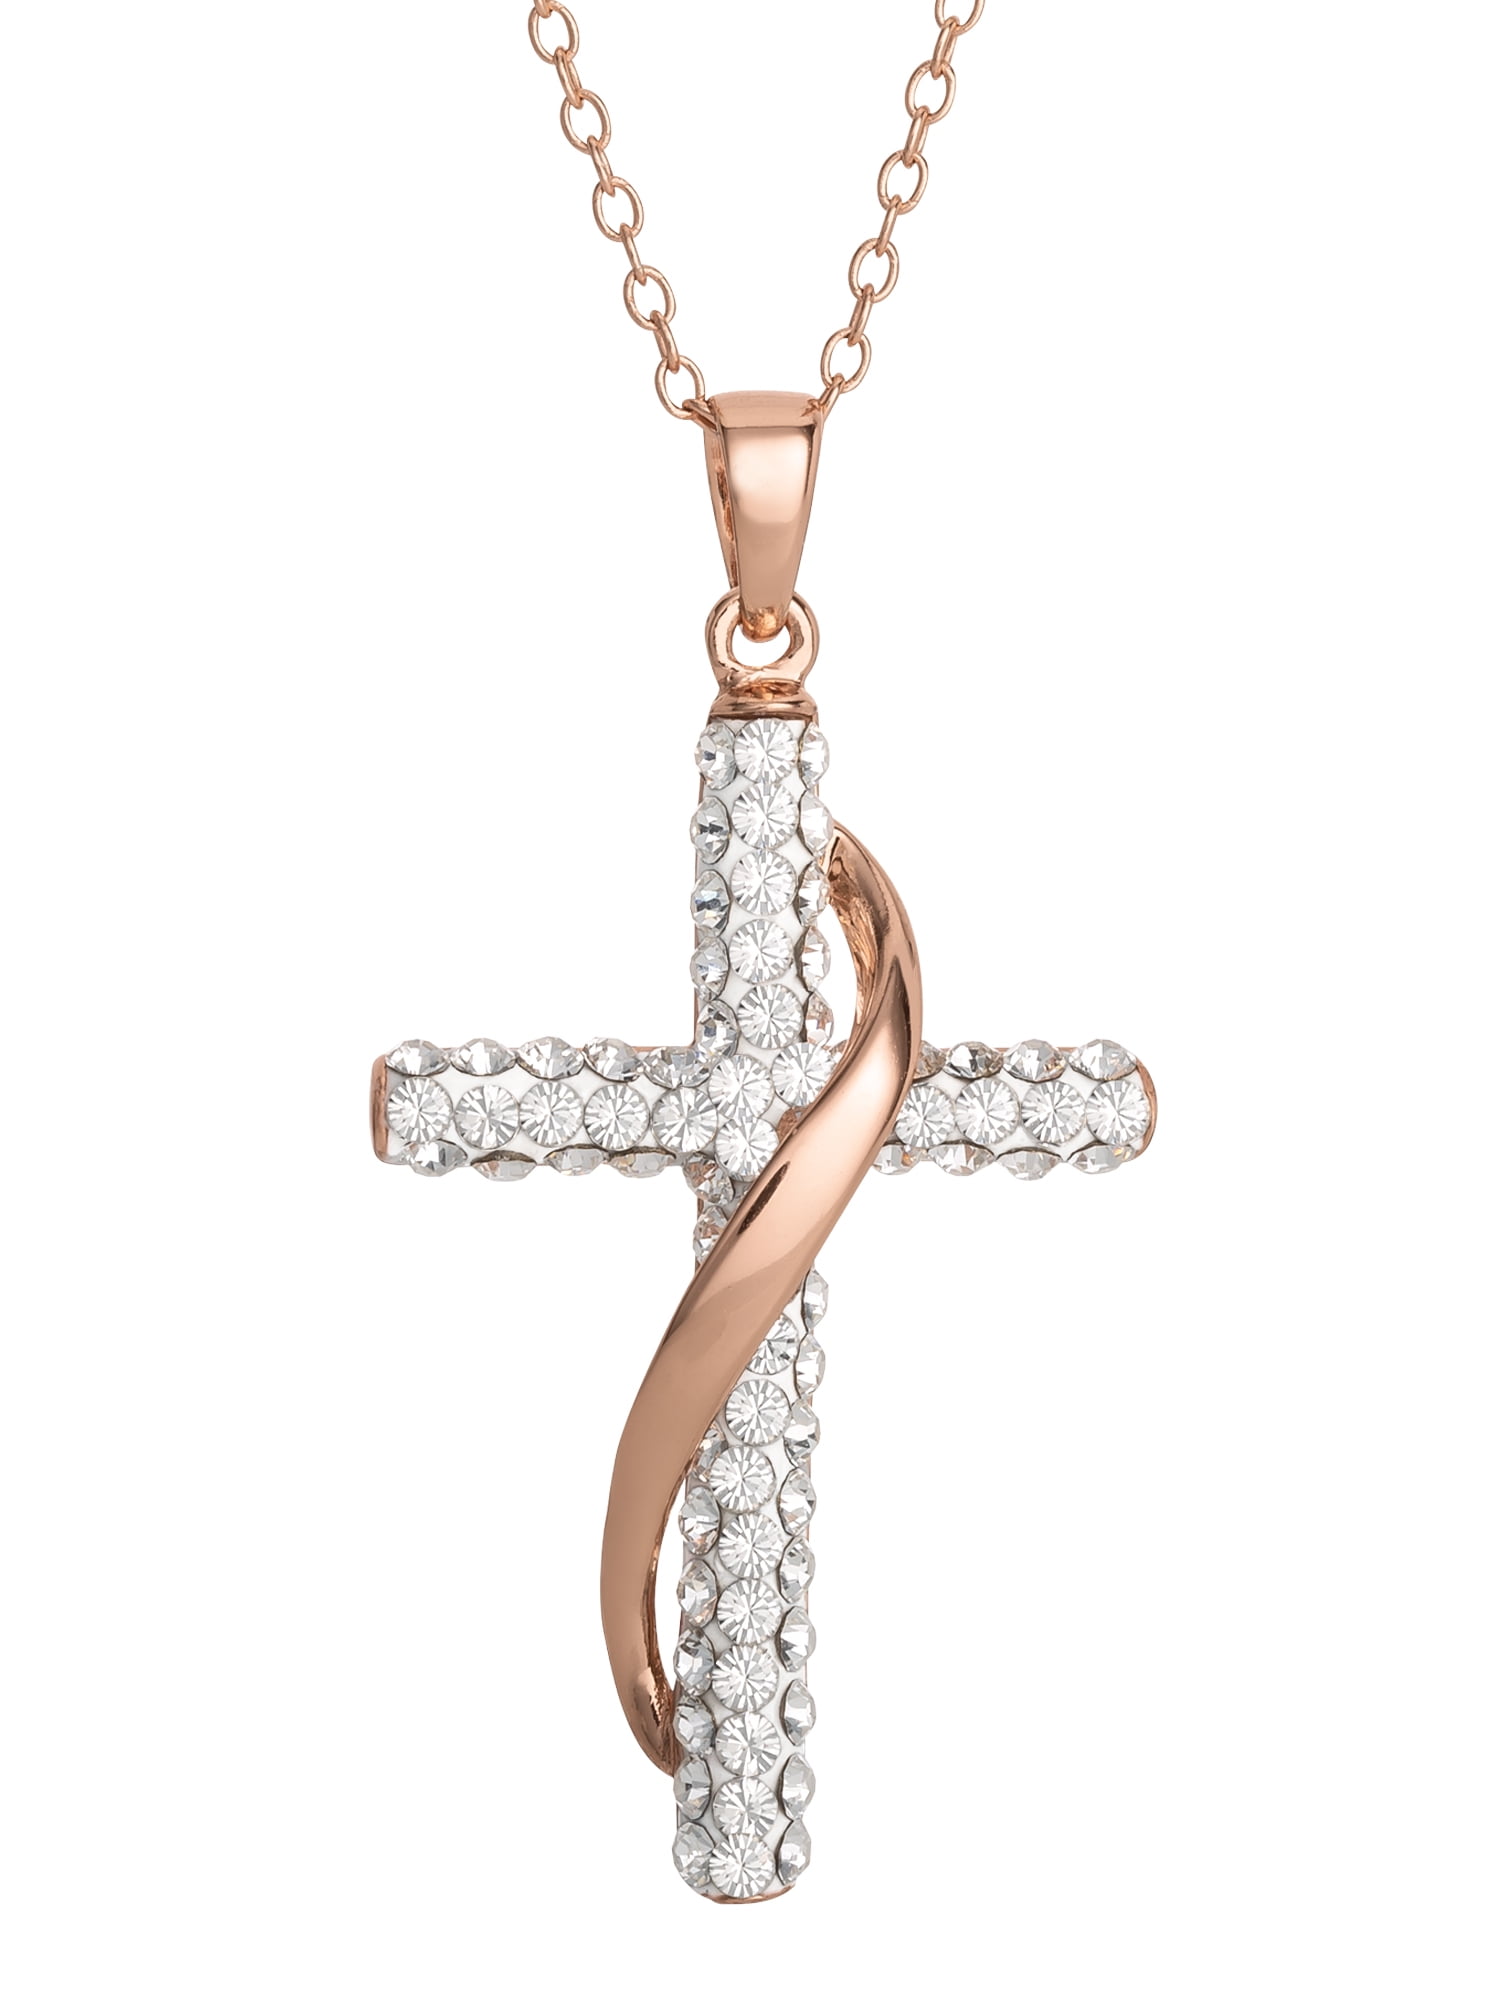 Brilliance Fine Jewelry Women's Sterling Silver 14KT Gold Plated Crystal Cross Pendant Necklace, 18" chain